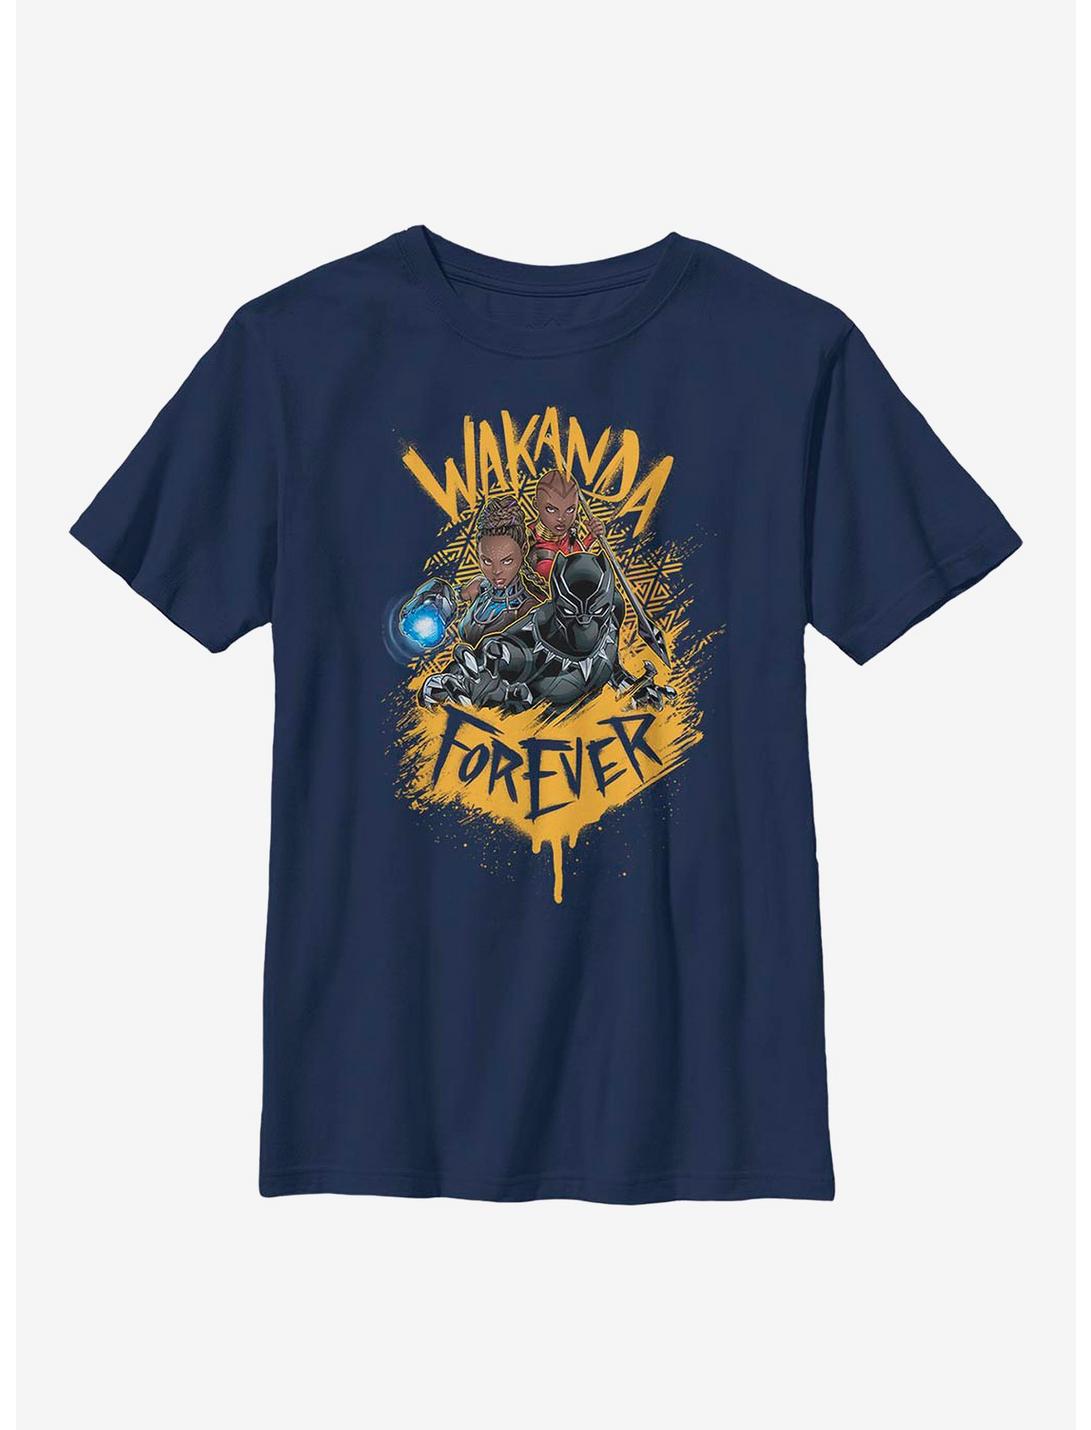 Marvel Black Panther Trinity Youth T-Shirt, NAVY, hi-res